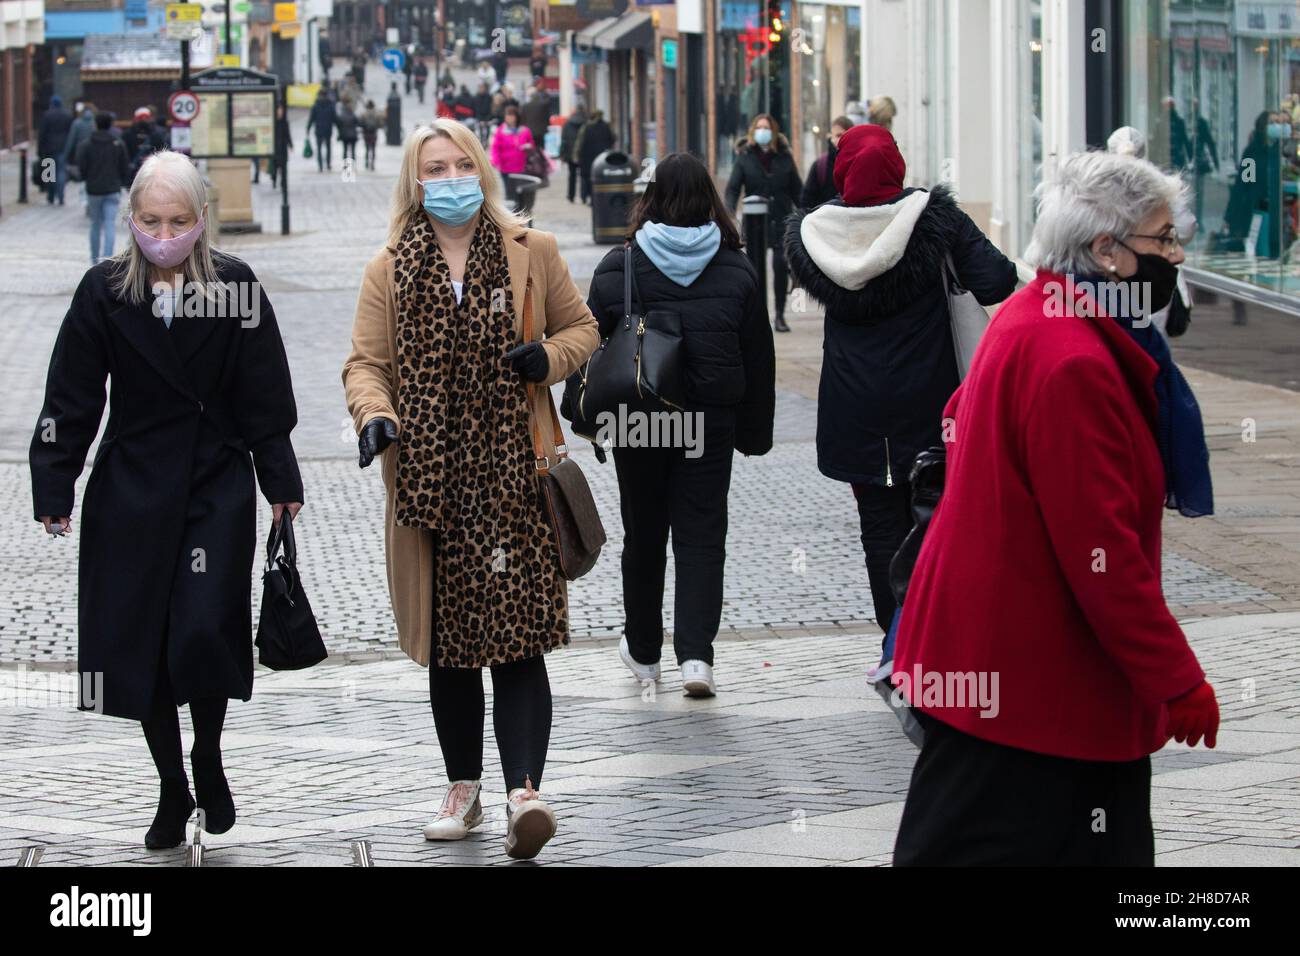 Windsor, UK. 29th November, 2021. Shoppers pass through the town centre wearing face coverings. The Health Secretary Sajid Javid yesterday announced following the emergence in the UK of the Omicron coronavirus variant that the wearing of face masks would become mandatory in shops and on public transport with effect from 4am on 30th November, with fines ranging between £200-£6,400 to be issued to people in England who fail to wear them depending on the number of offences. Credit: Mark Kerrison/Alamy Live News Stock Photo